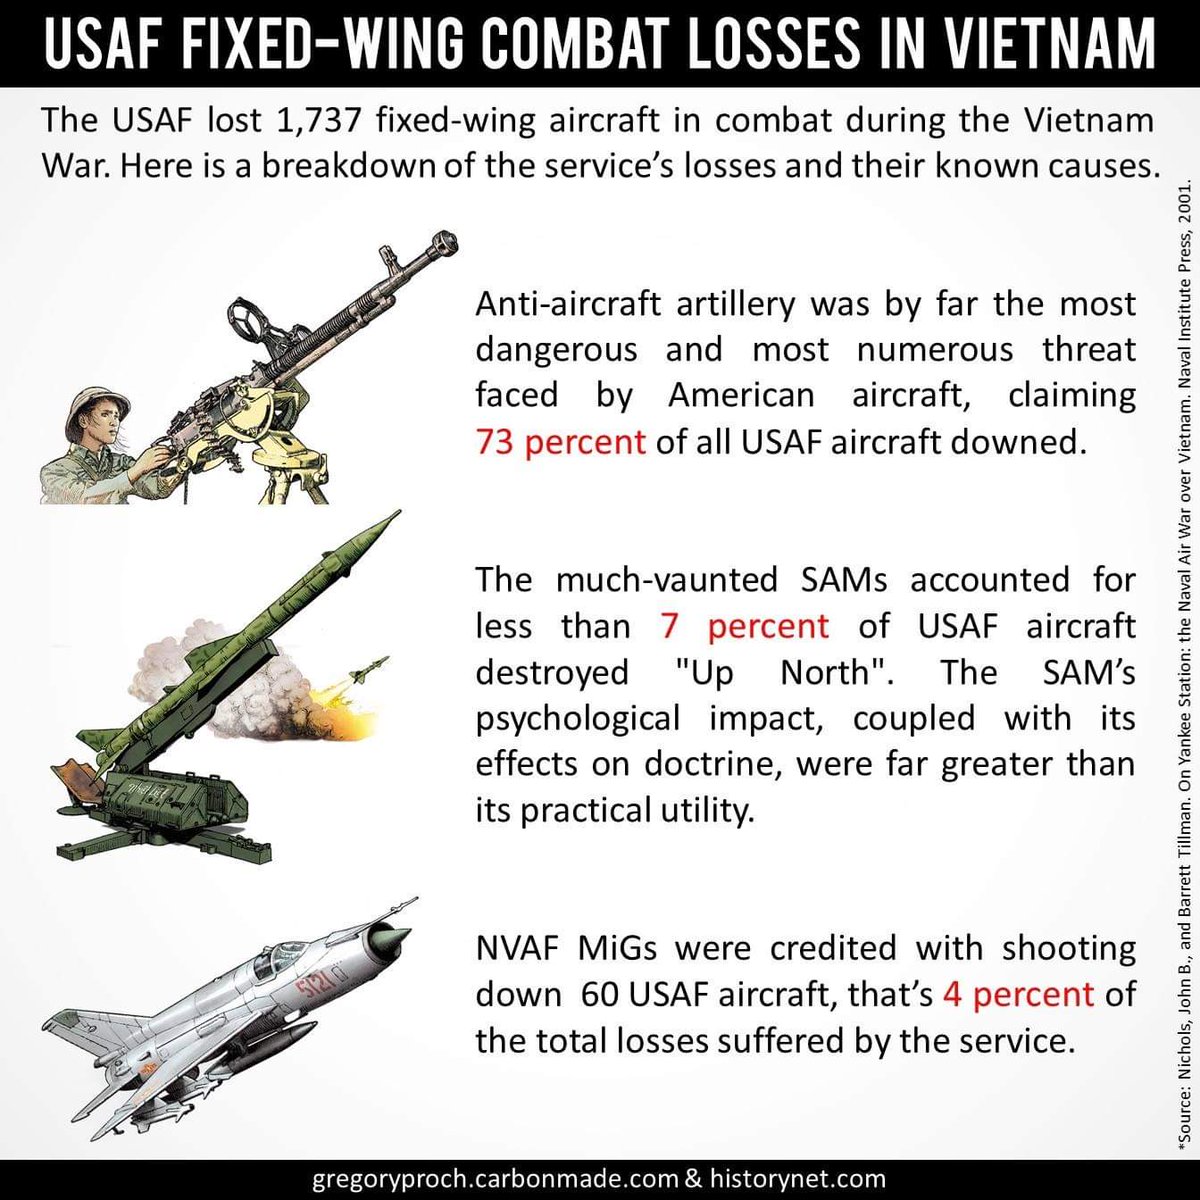 Did you know that b/w April 1965 and March 1973, the USAF flew 1.99 million fixed-wing combat sorties over Vietnam? Here’s a breakdown of the aircraft losses suffered by the service and their suspected causes. #avgeeks #aviation #aviationdaily #USAF